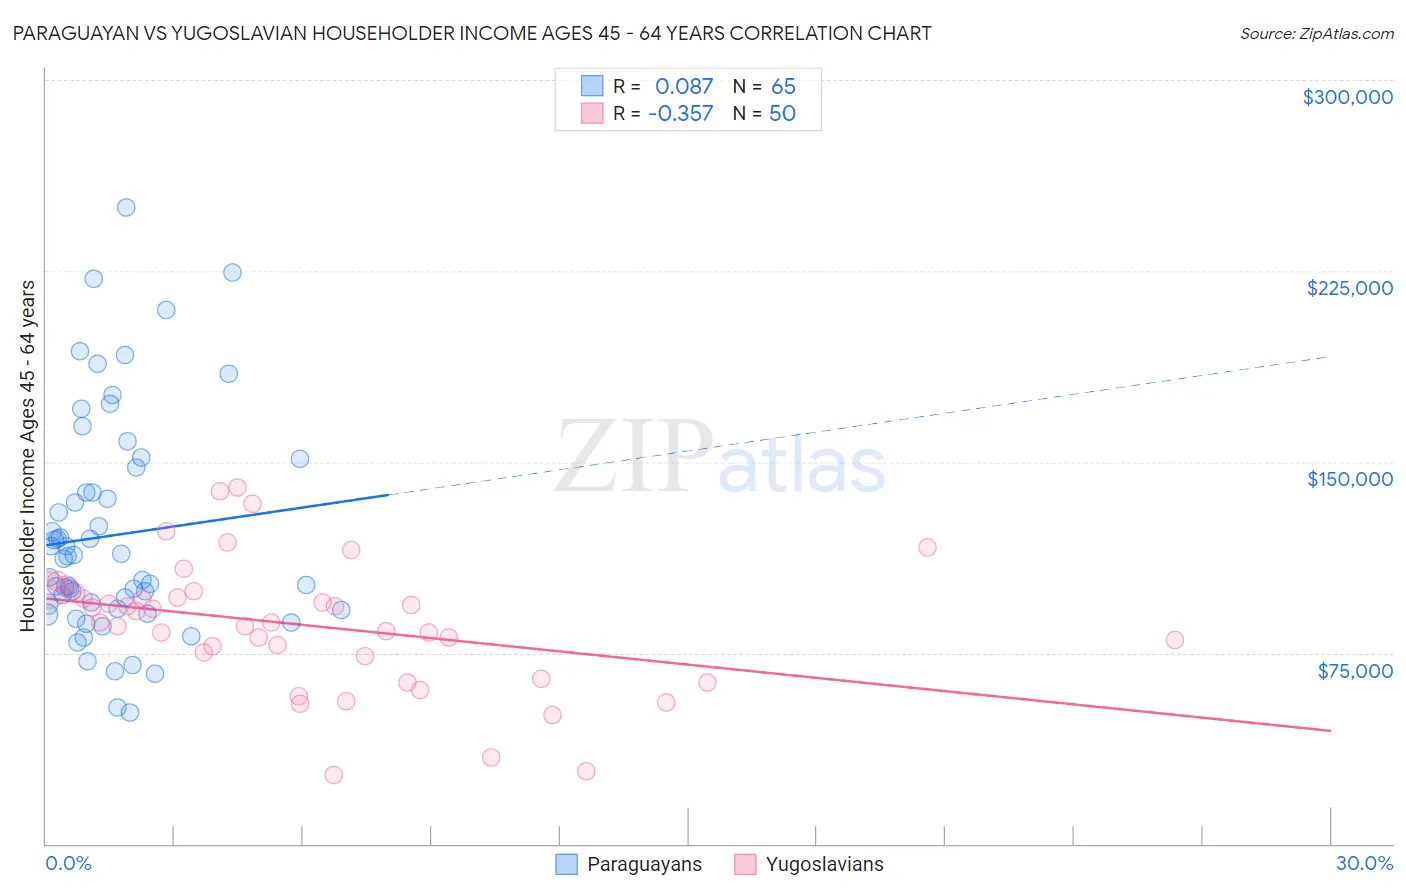 Paraguayan vs Yugoslavian Householder Income Ages 45 - 64 years